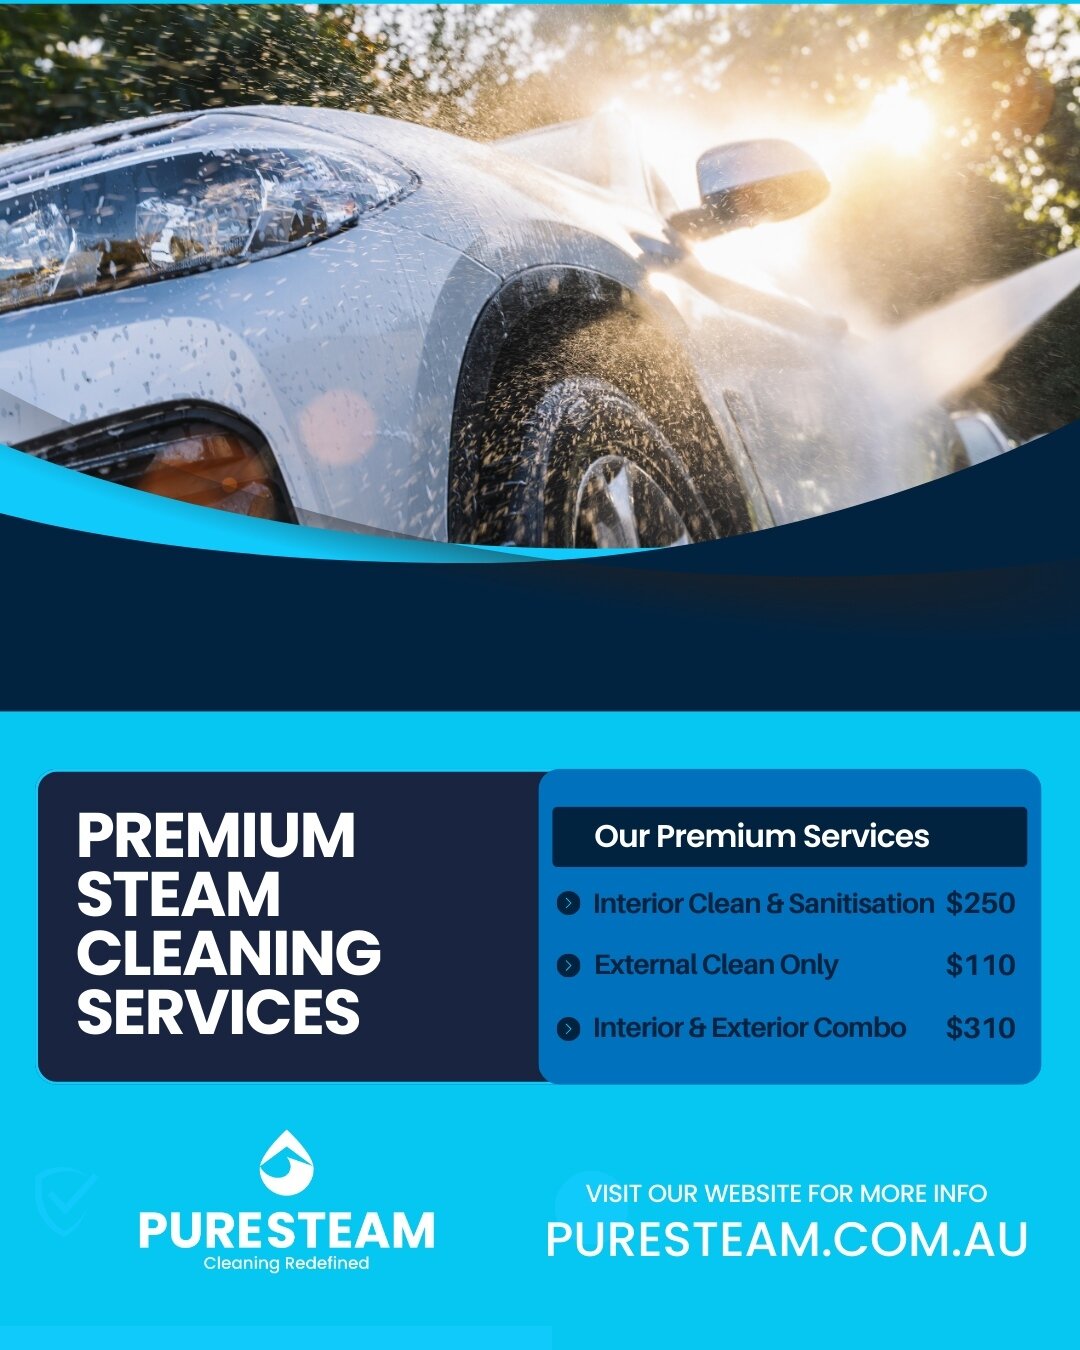 My car cleaning service is a fan favourite and perfect for family cars, new additions to the fleet, or even those collector's gems 🚗⁠
⁠
Want your car looking clean and shiny from top to bottom? Here's what we offer:⁠
⁠
Interior Cleaning and Sanitisa